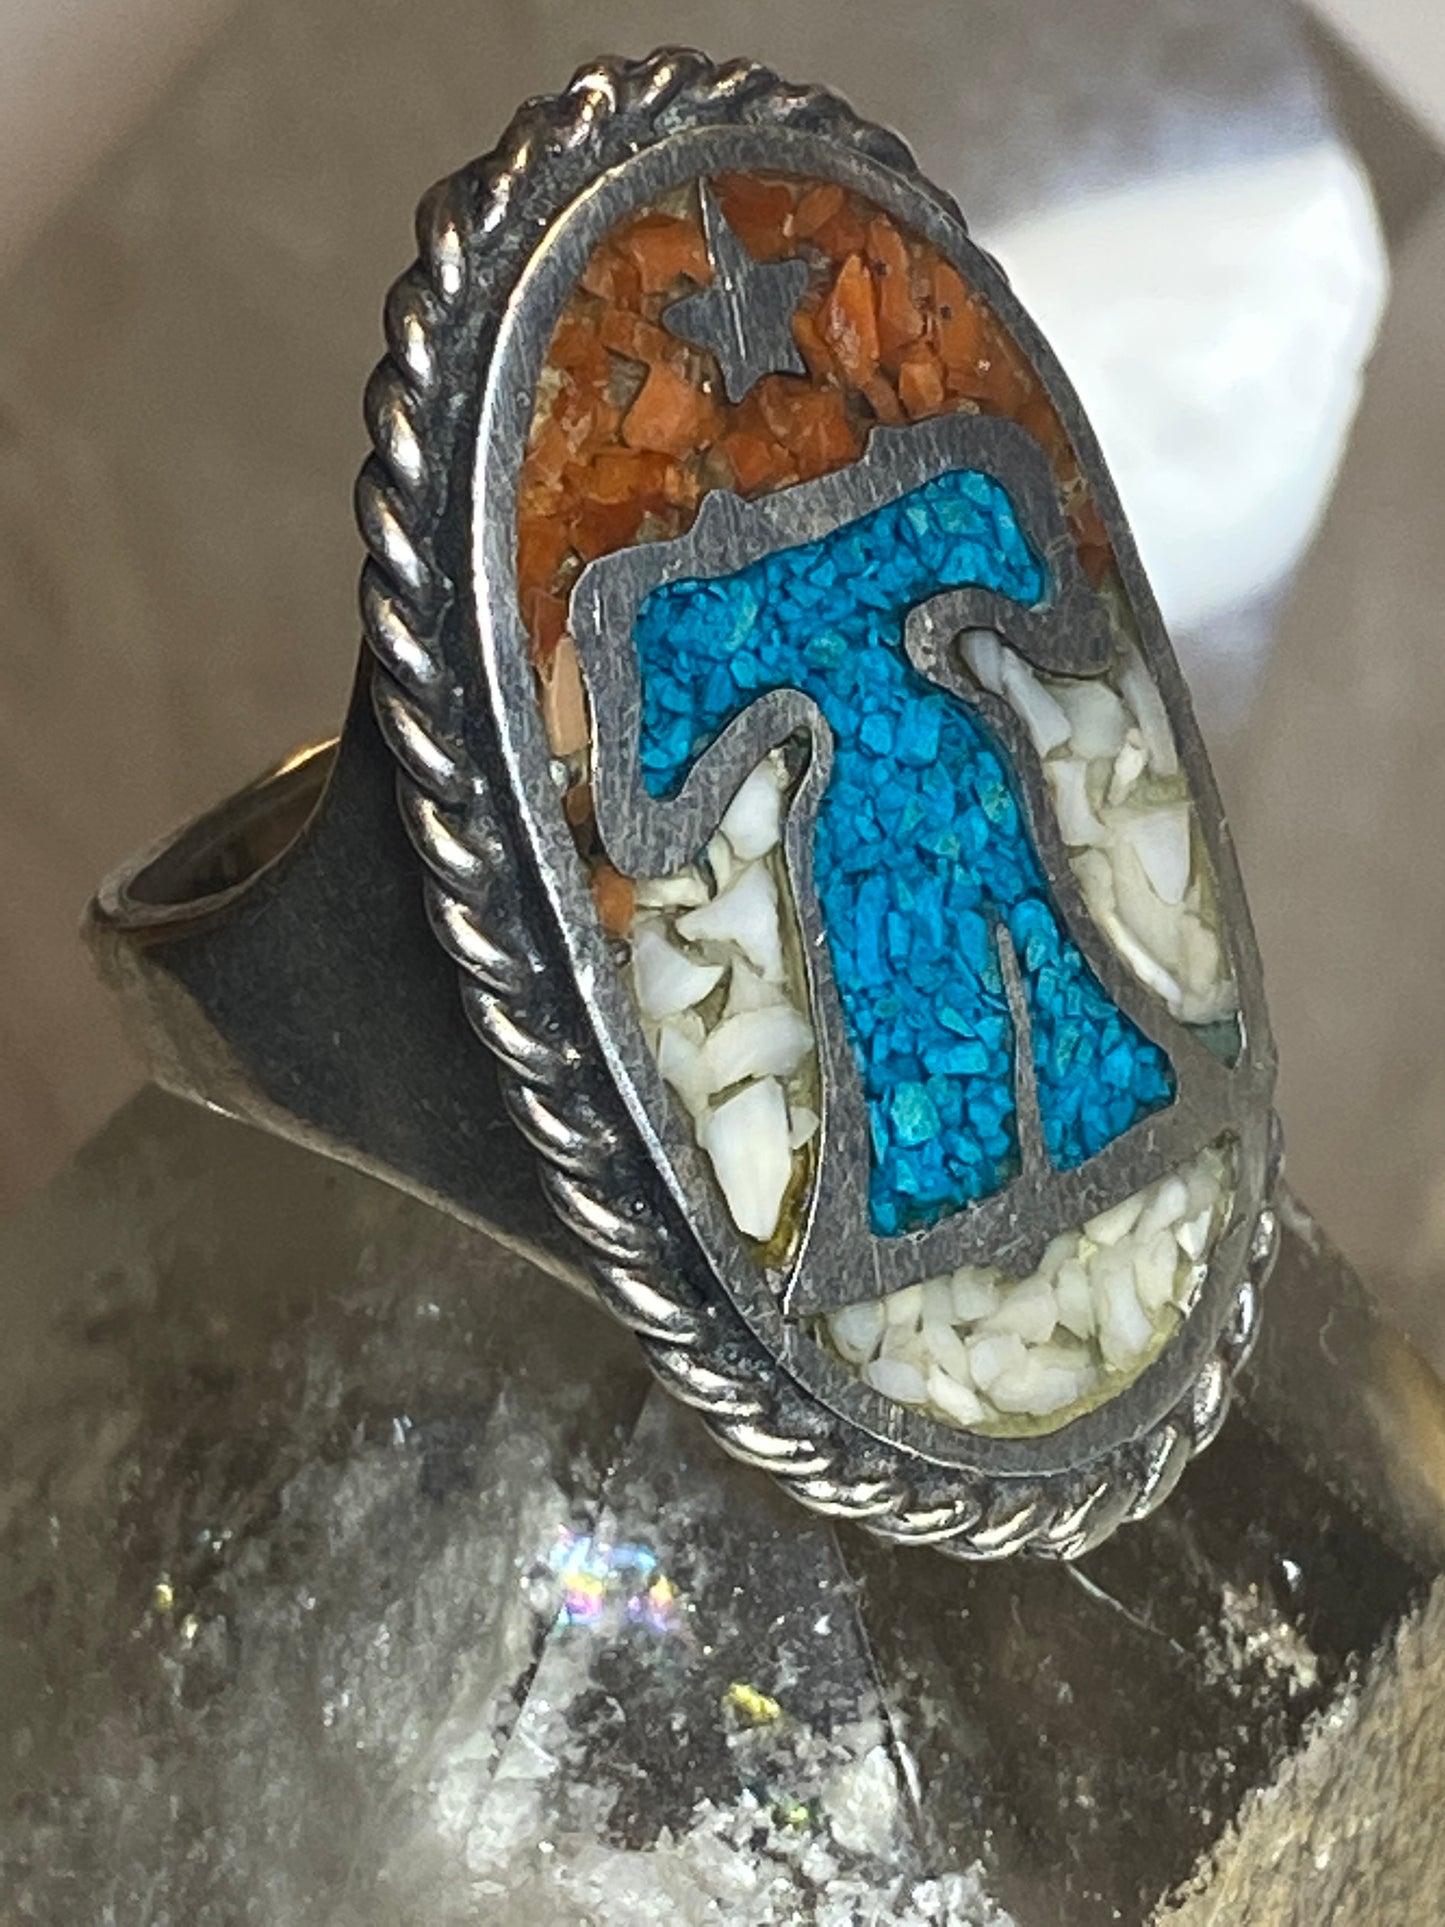 Liberty Bell ring size 8 turquoise chips coral Independence July 4 sterling silver women